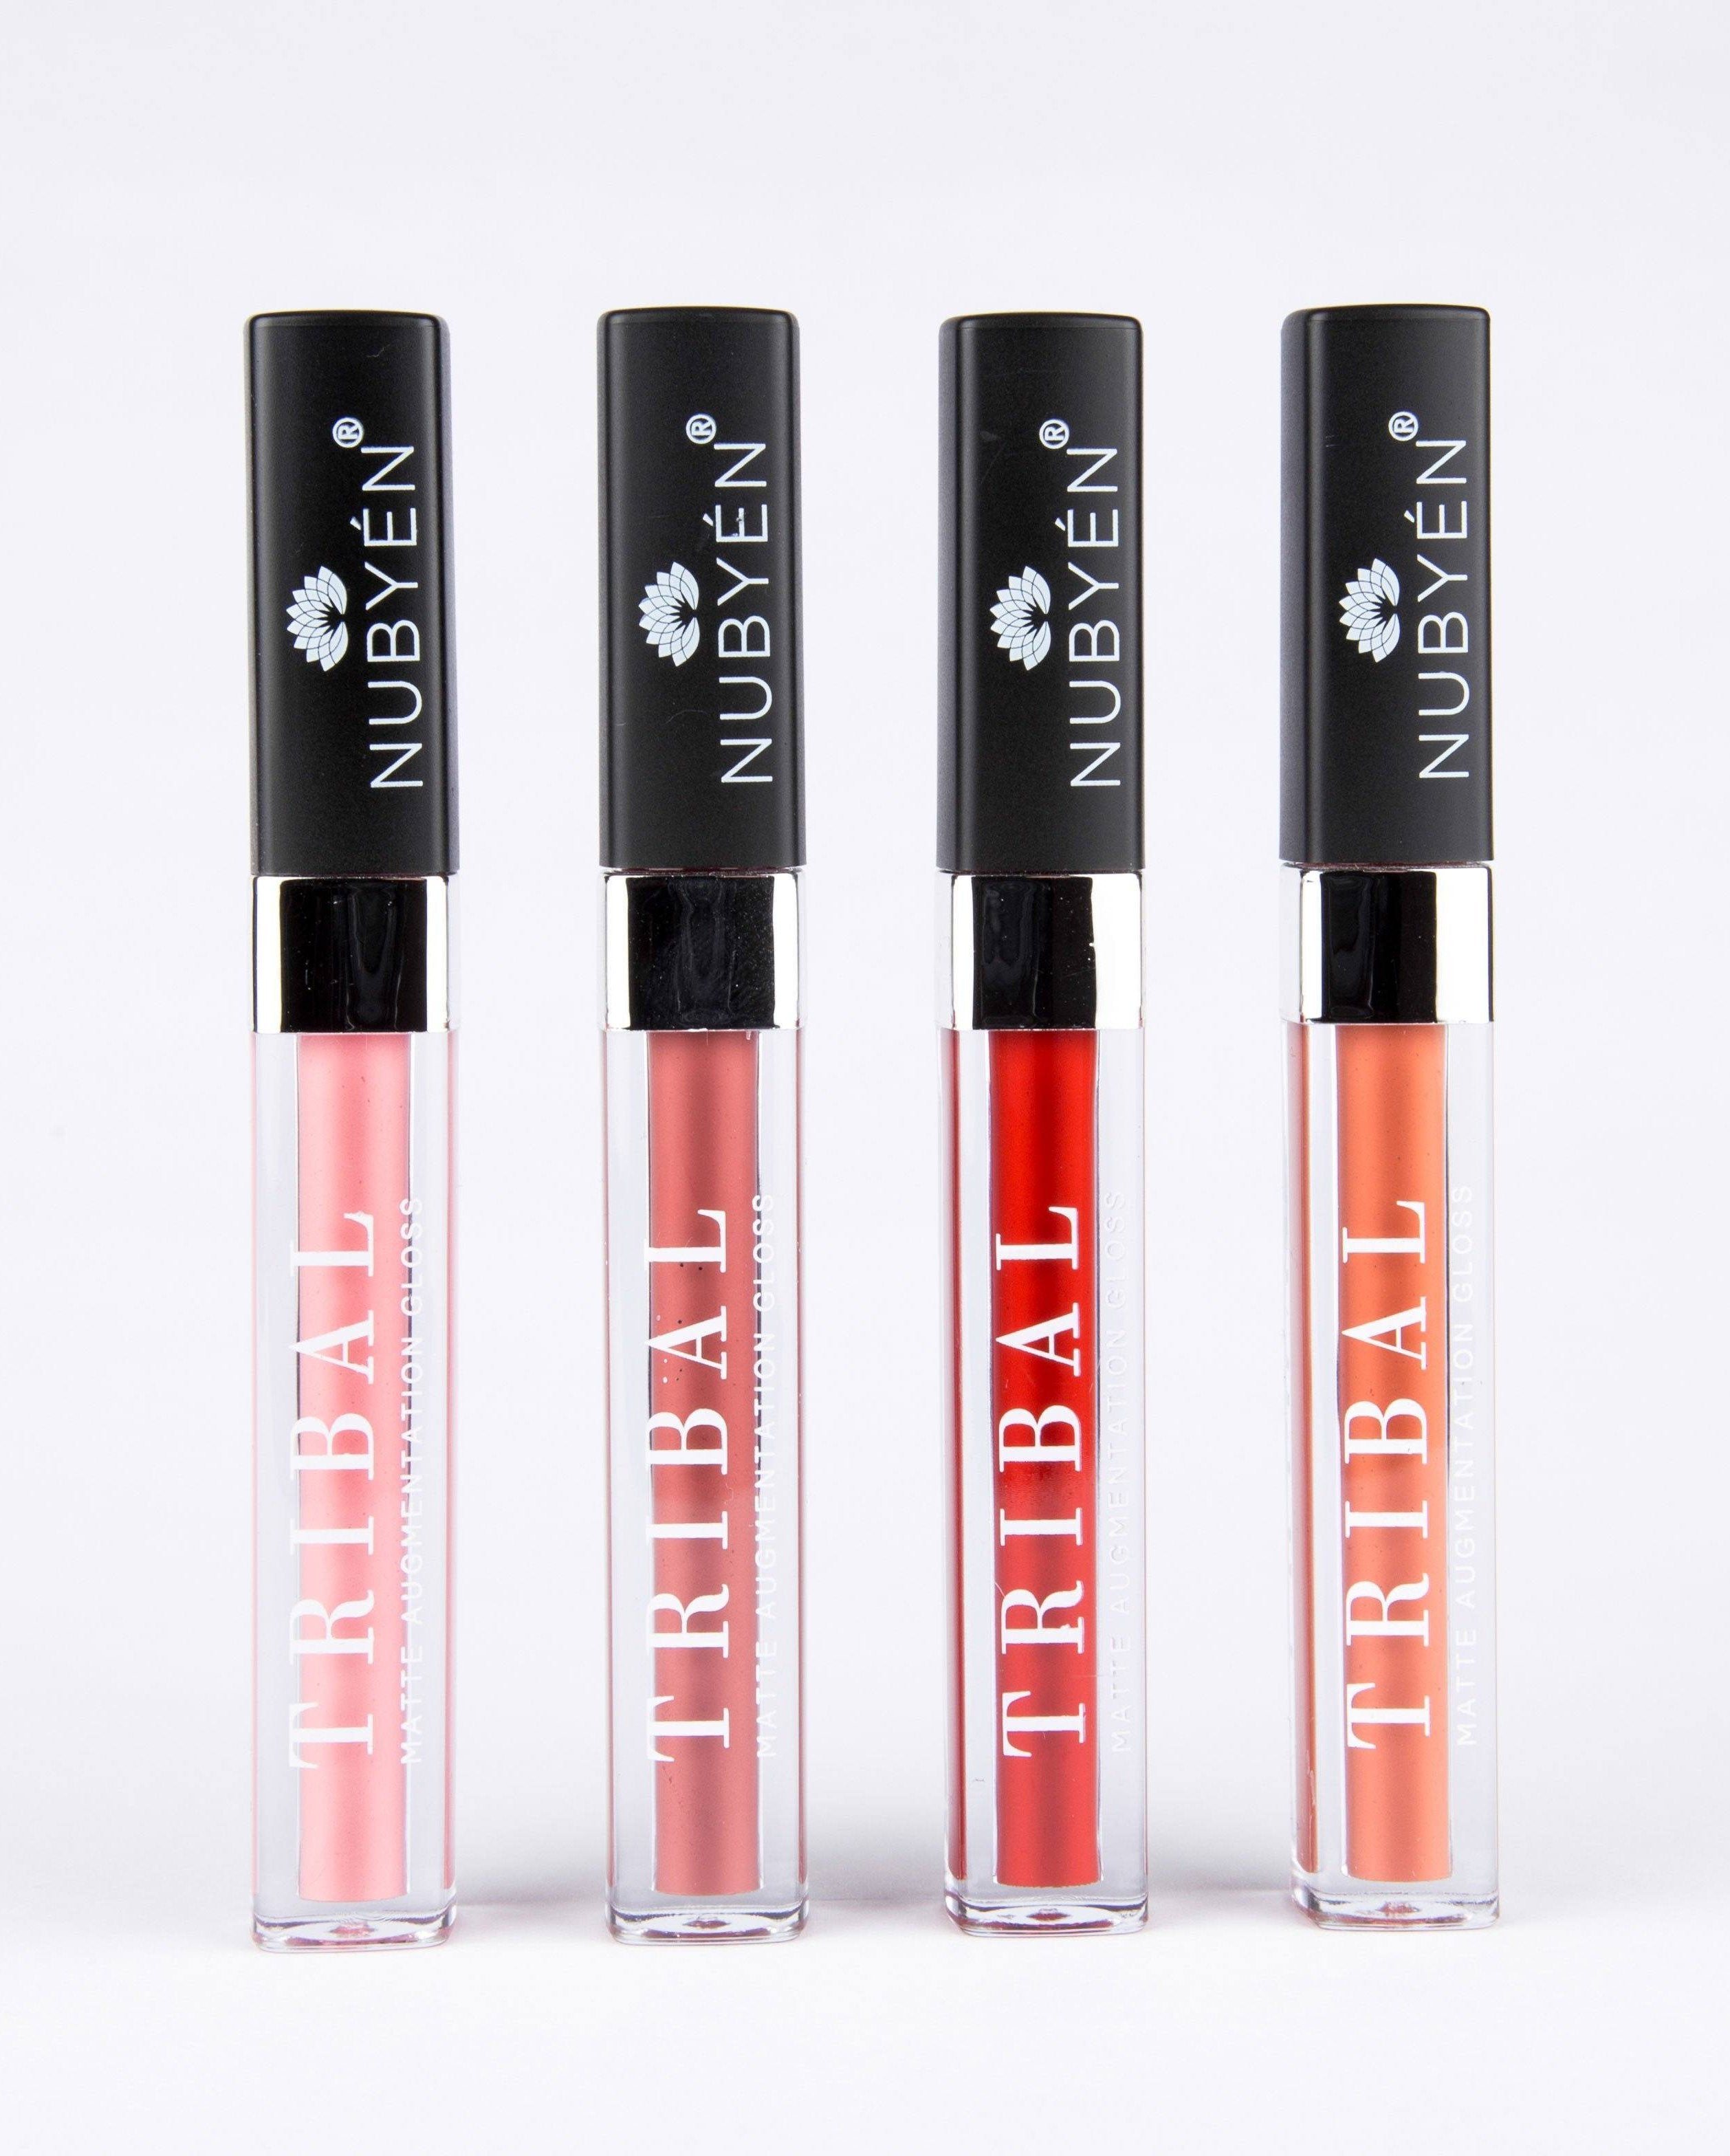 This Lip plumping gloss , its our best selling  matte vegan and cruelty free lip plumping gloss for fuller lips instantly, has natural ingredients such as collagen & hyaluronic acid. its called tribal by nubyen nude, wunder2 wonderkiss, wunderkiss lip plumper , good lip plumper, milani lip plumper, lip  injections, do it yourself lip plumper,  